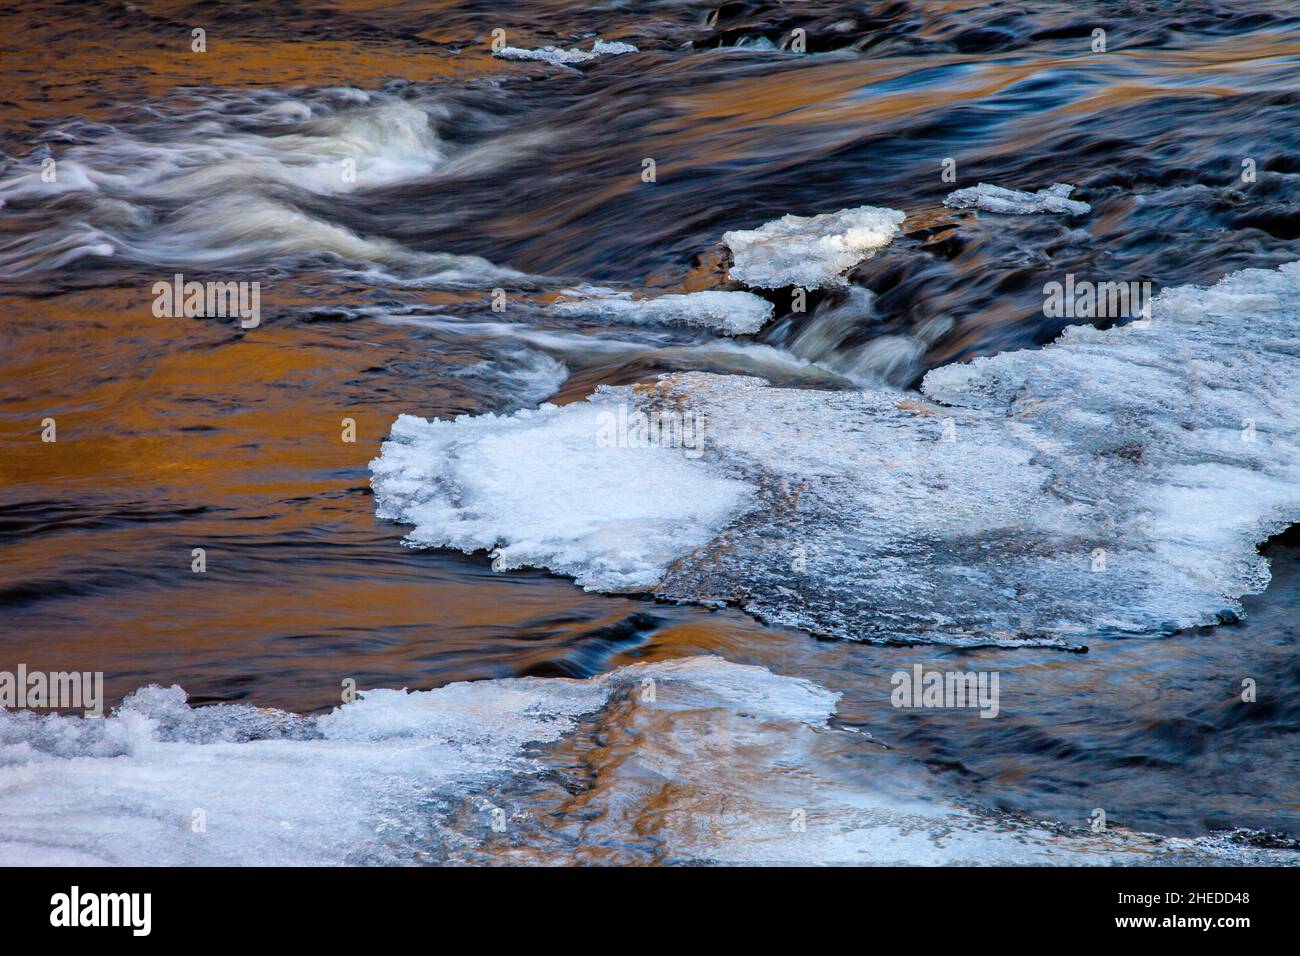 Ice and late afternoon reflections on Tobyhanna Creek in Pennsylvania's Pocono Mountains in early winter. Stock Photo